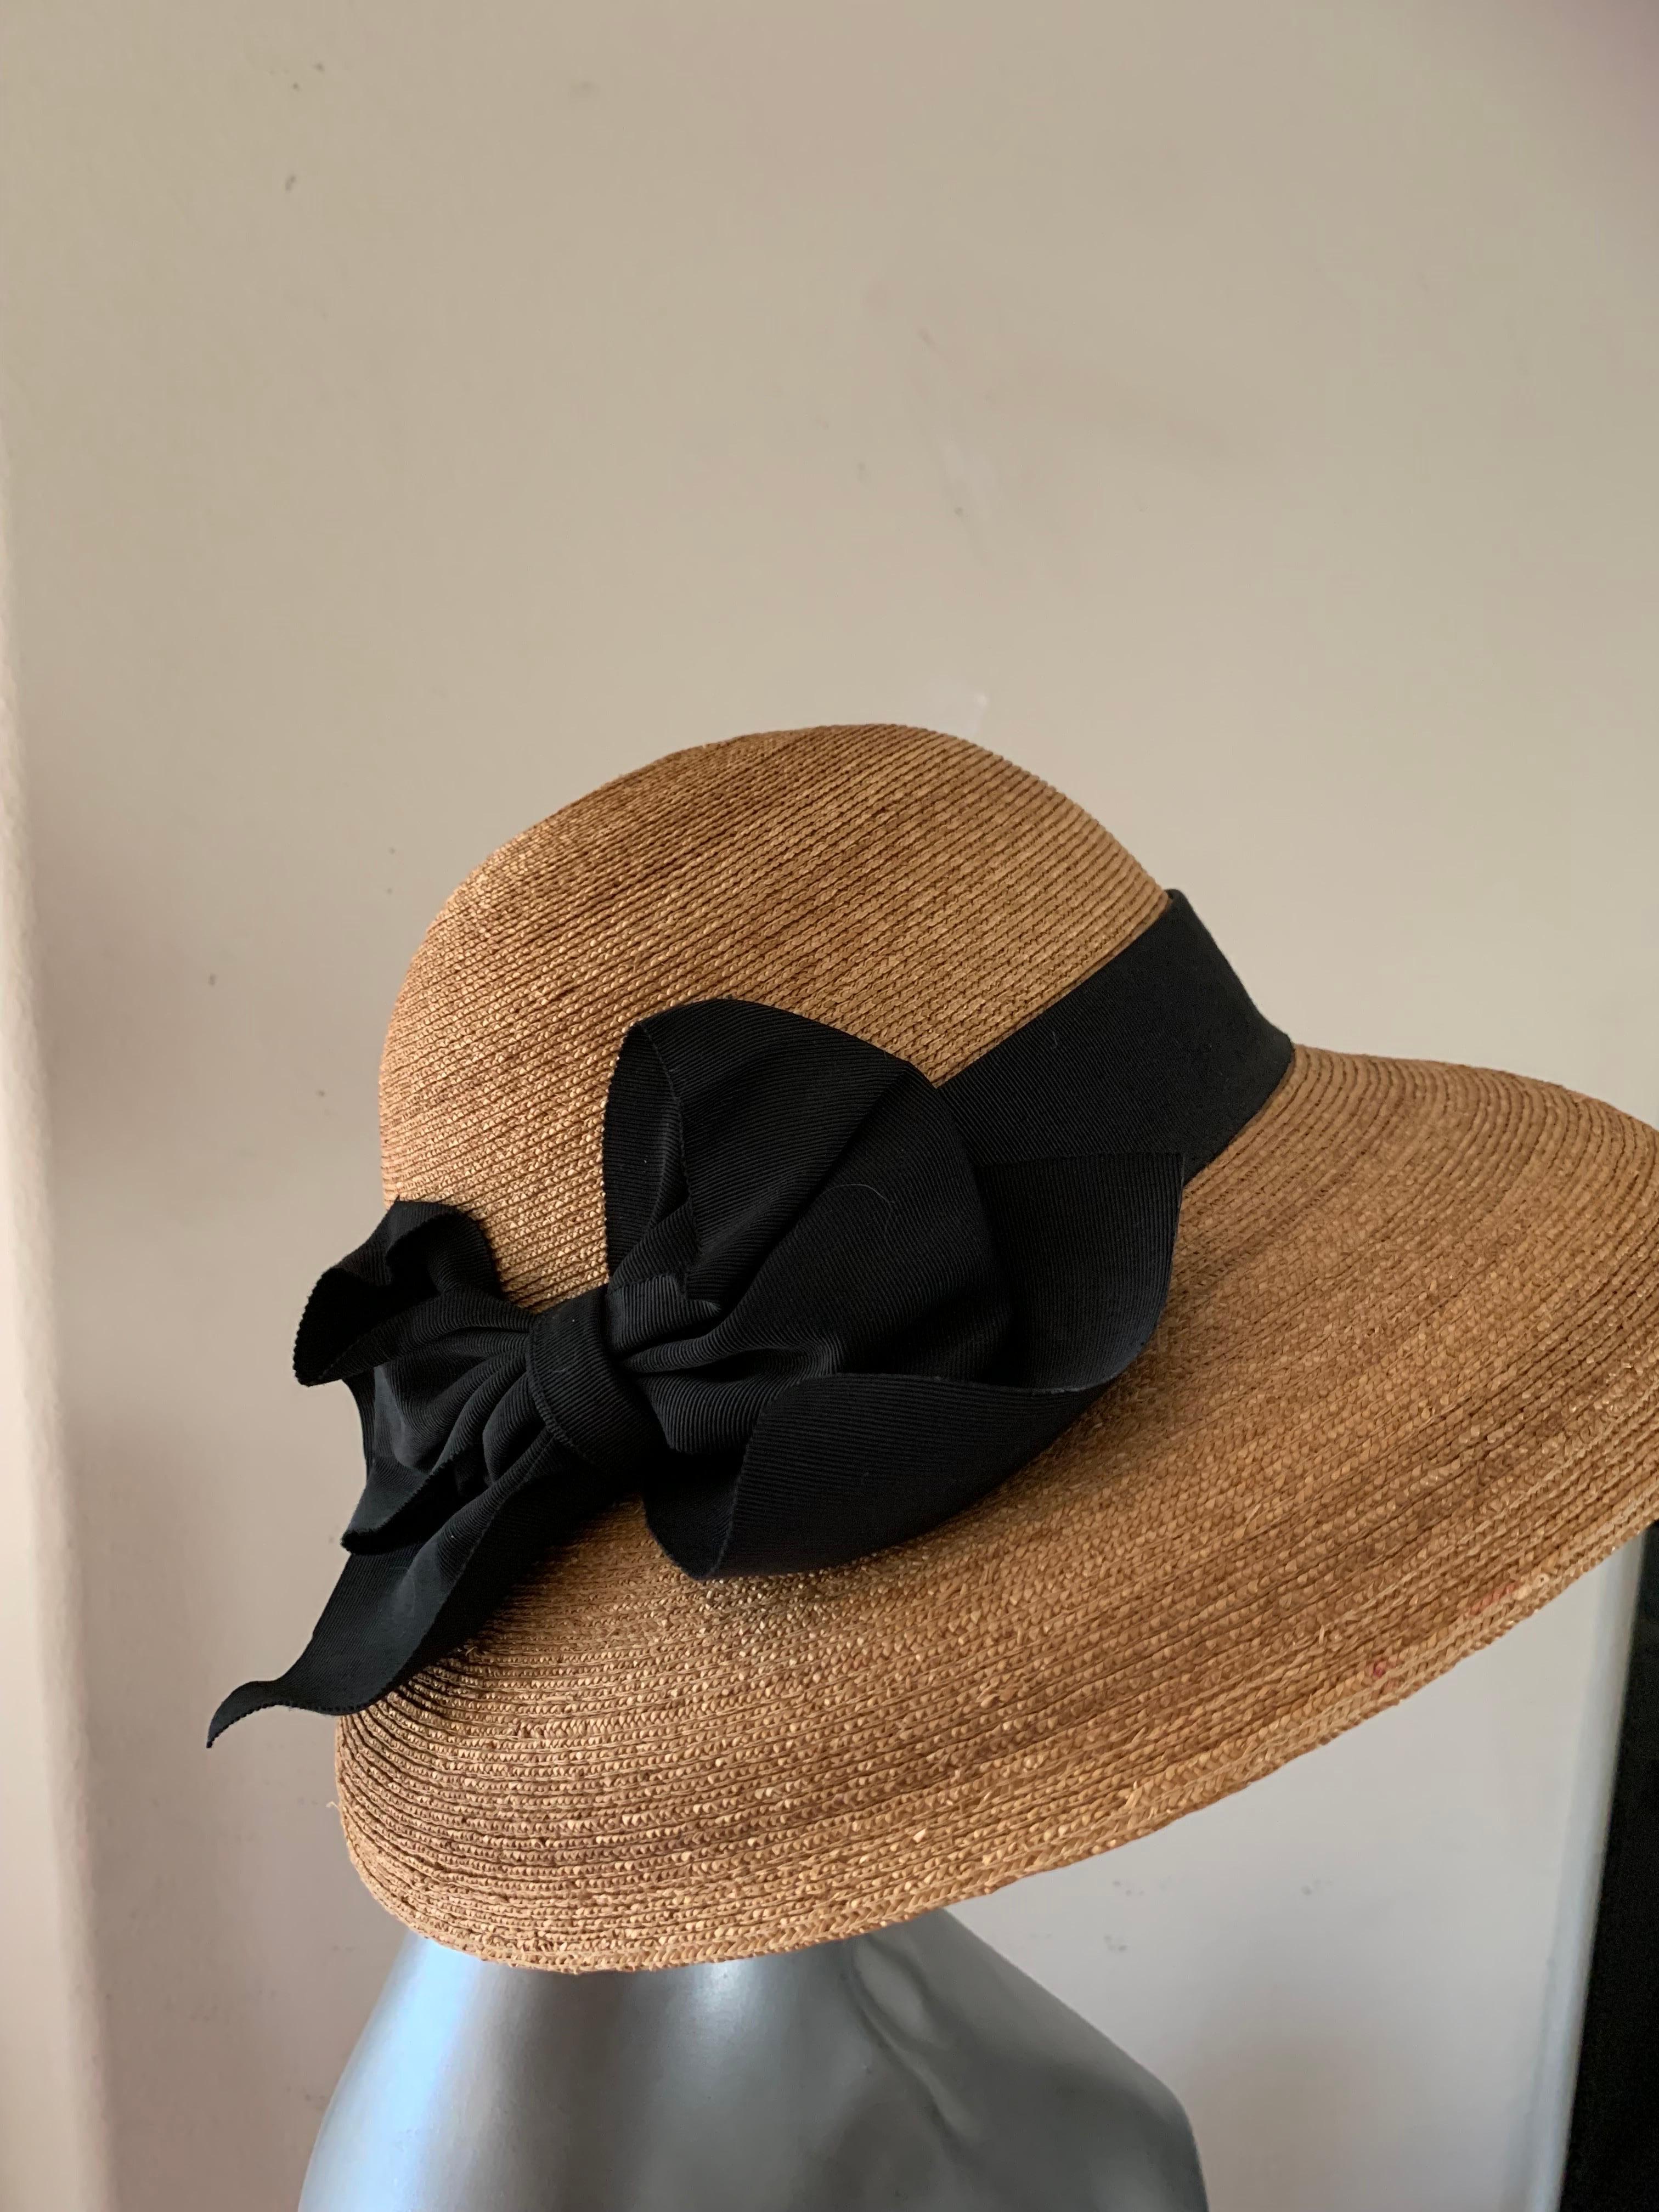 Tracey Tooker Straw Boater Hat with Black Grosgrain Bow NWOT For Sale 2